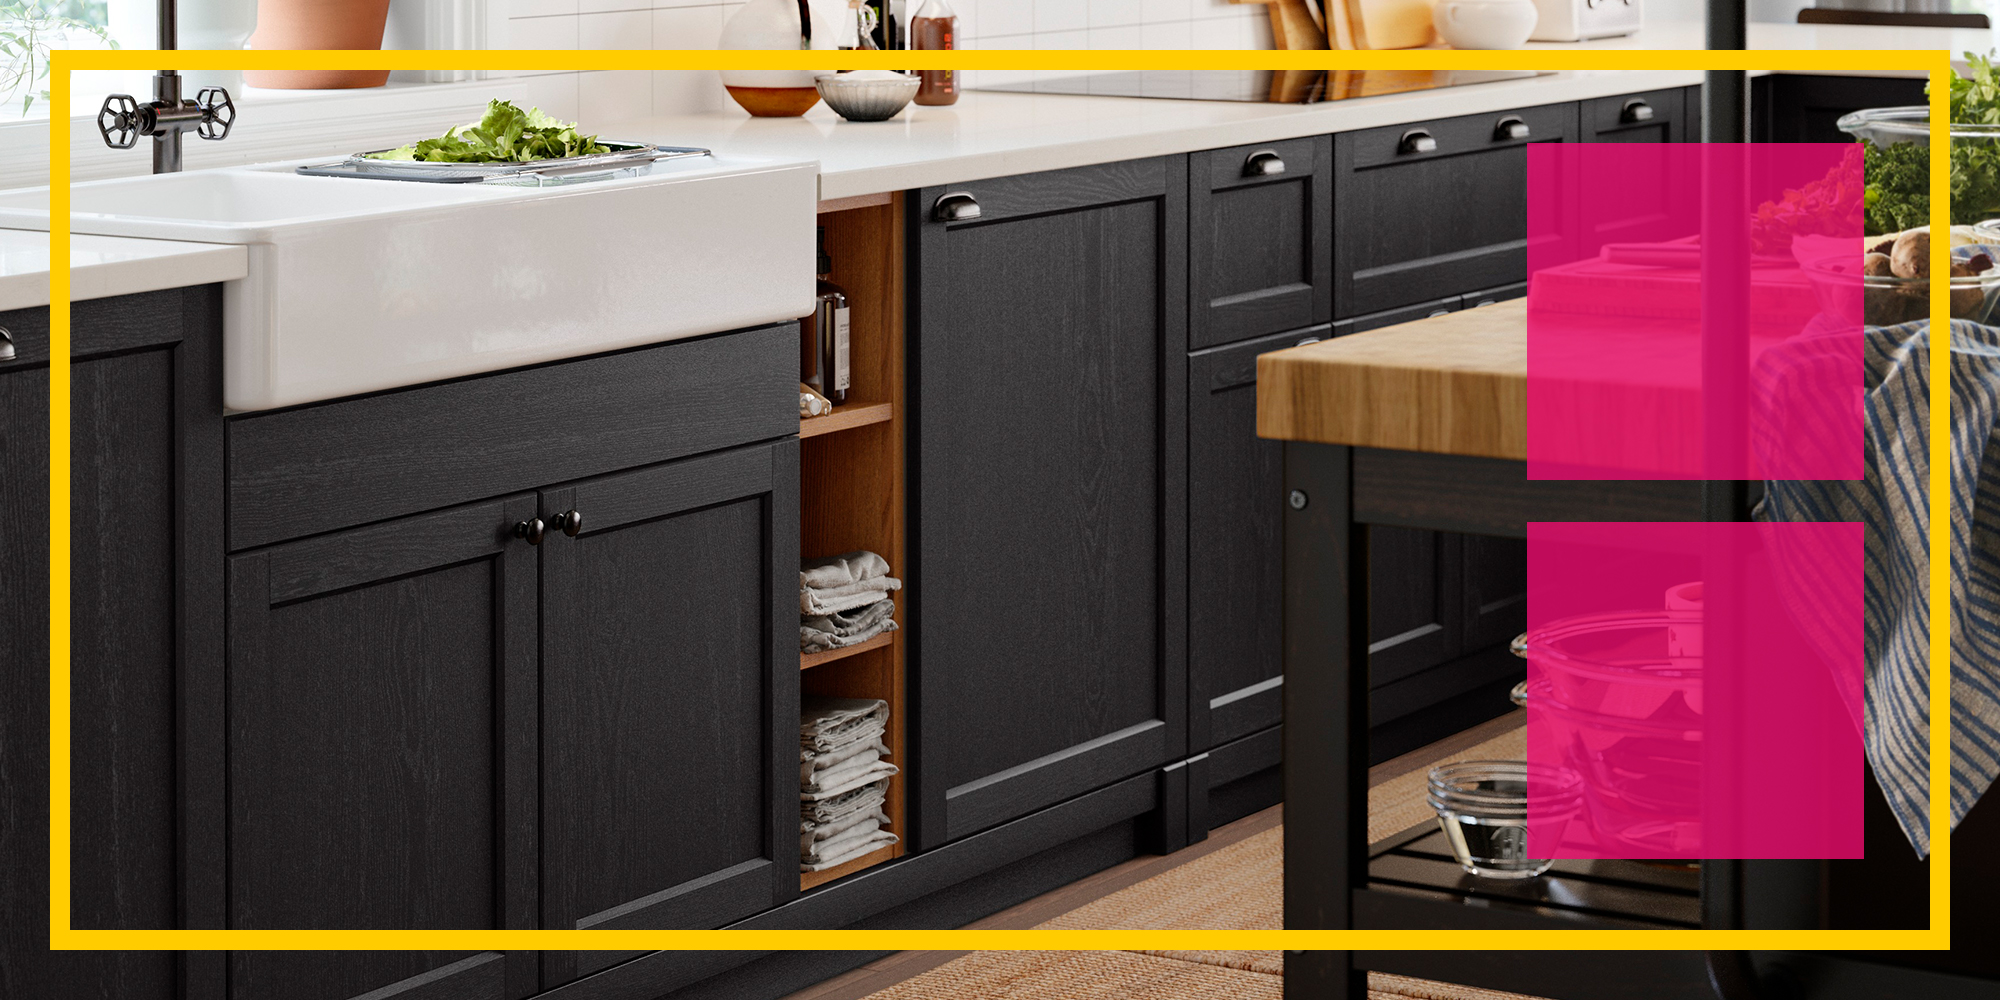 ikea kitchen area motivation: cabinets as well as doors